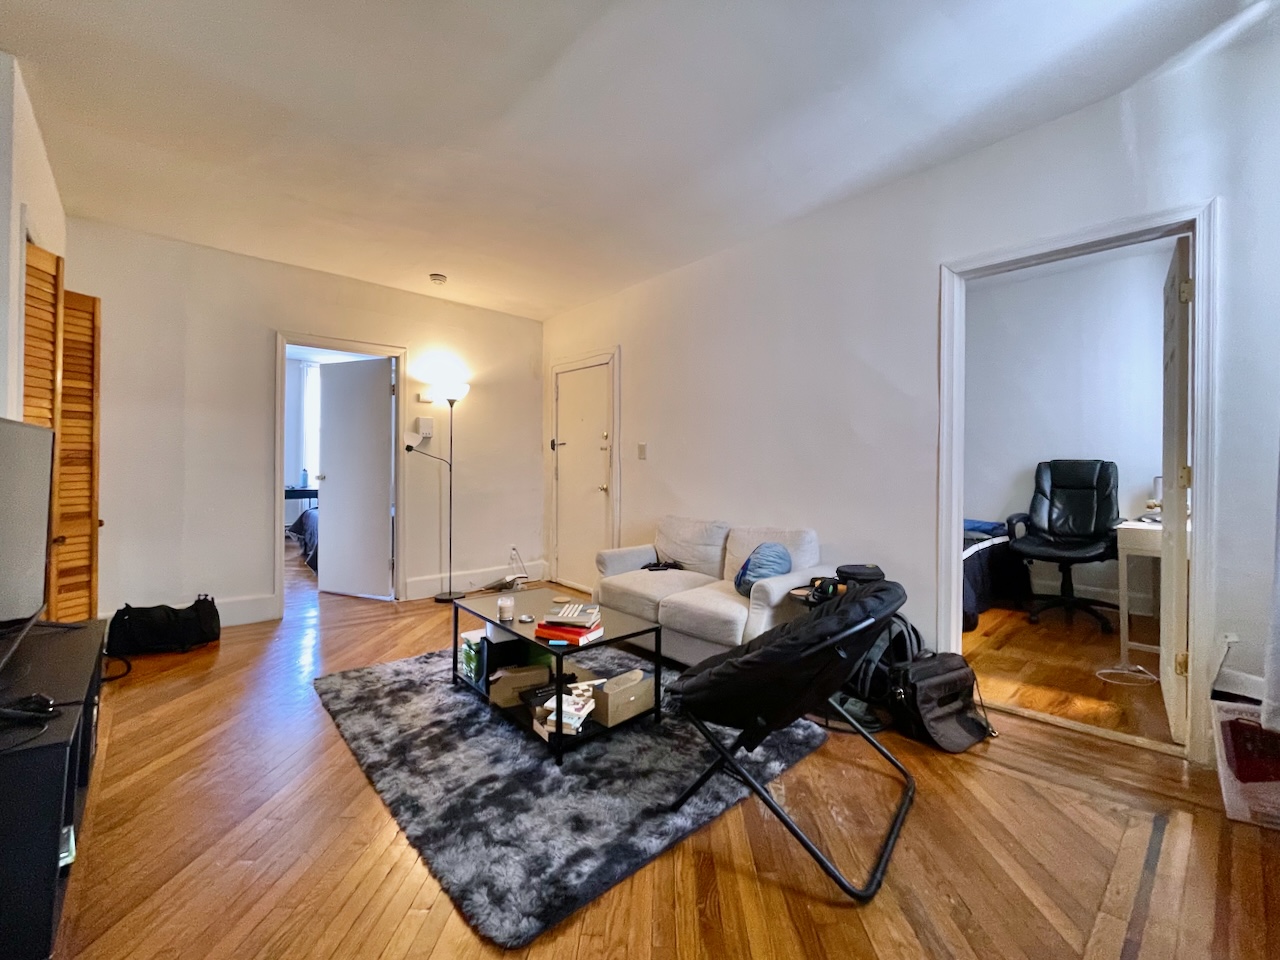 Amazing location on Ogden Ave, close to Riverview-Fisk Park, Second St light rail via the "100 Steps to Hoboken", and direct NYC bus just one block away on Palisade Ave. This two bedroom apartment features an oversized bedroom with decorative fireplace, spacious living room with ample storage, and second bedroom with window - perfect for an office space, and a large shared backyard.  Easy street parking. Sorry, no dogs. Available July 1st!  